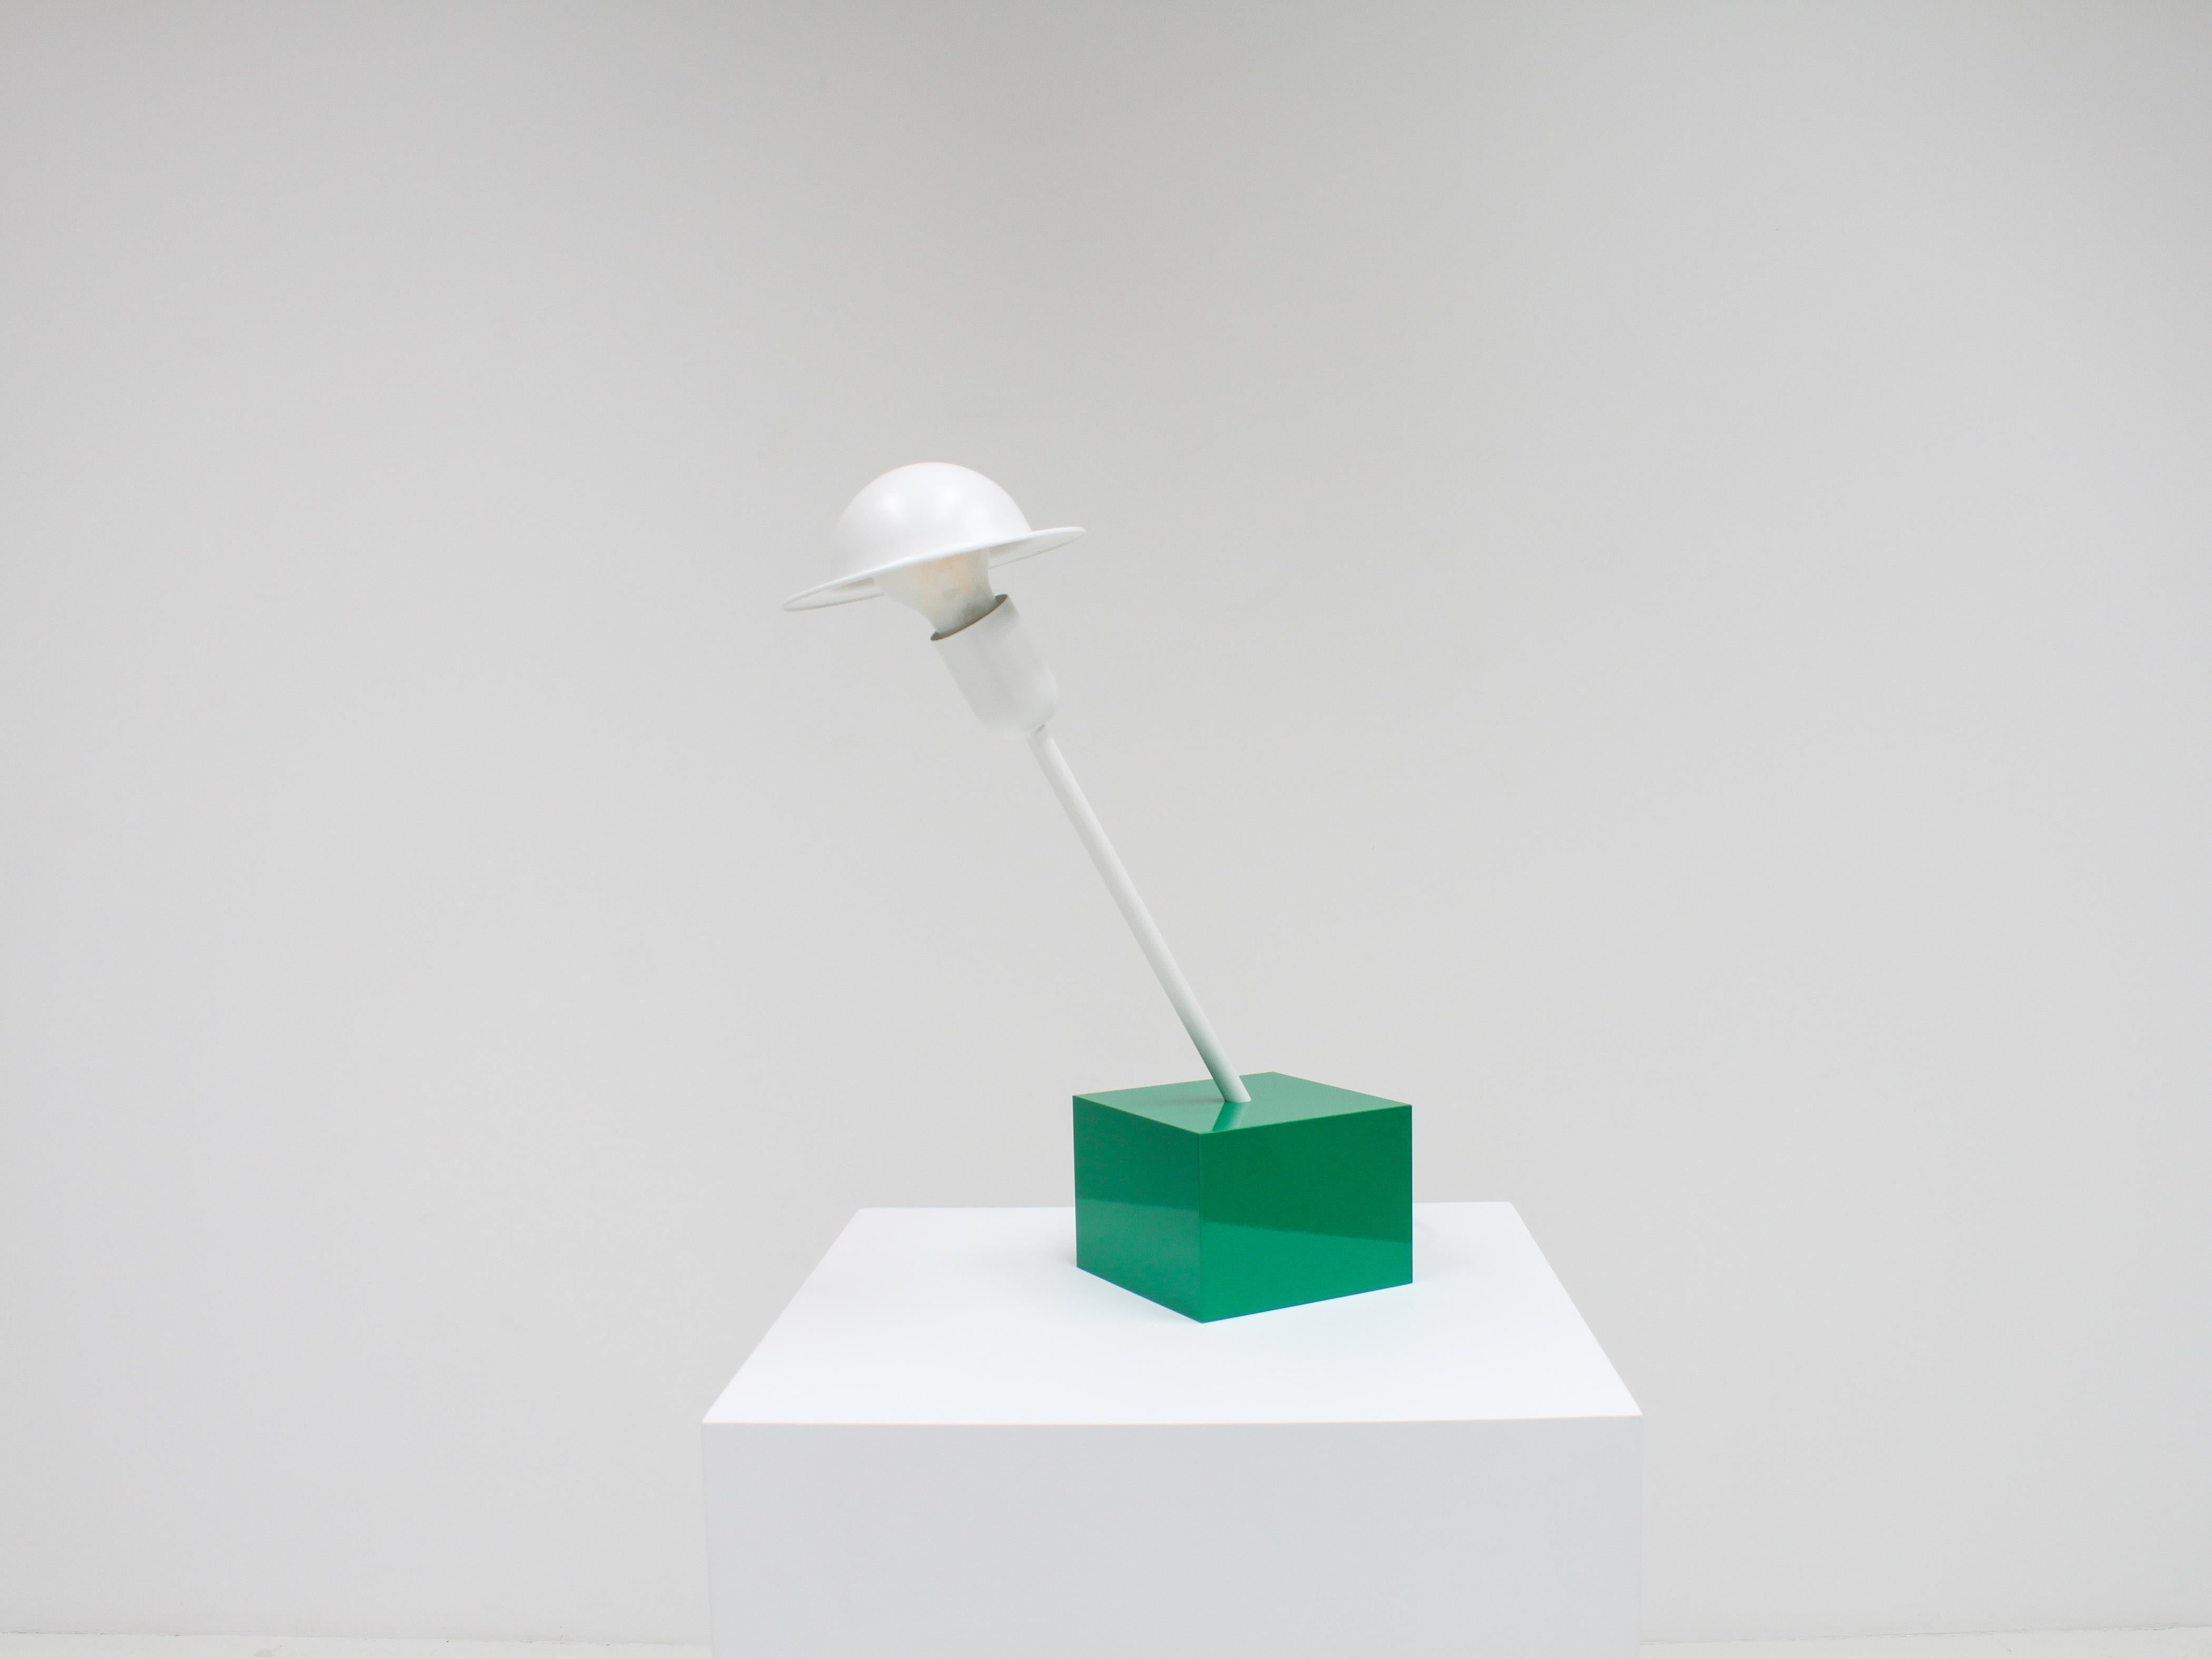 A Don table lamp designed by Ettore Sottsass in 1977. The lamp was manufactured by Stilnovo, Italy, and has a manufacturer’s label.

Consisting of a heavy cubical emerald green base with a white slanted rod and adjustable 'bowler hat'